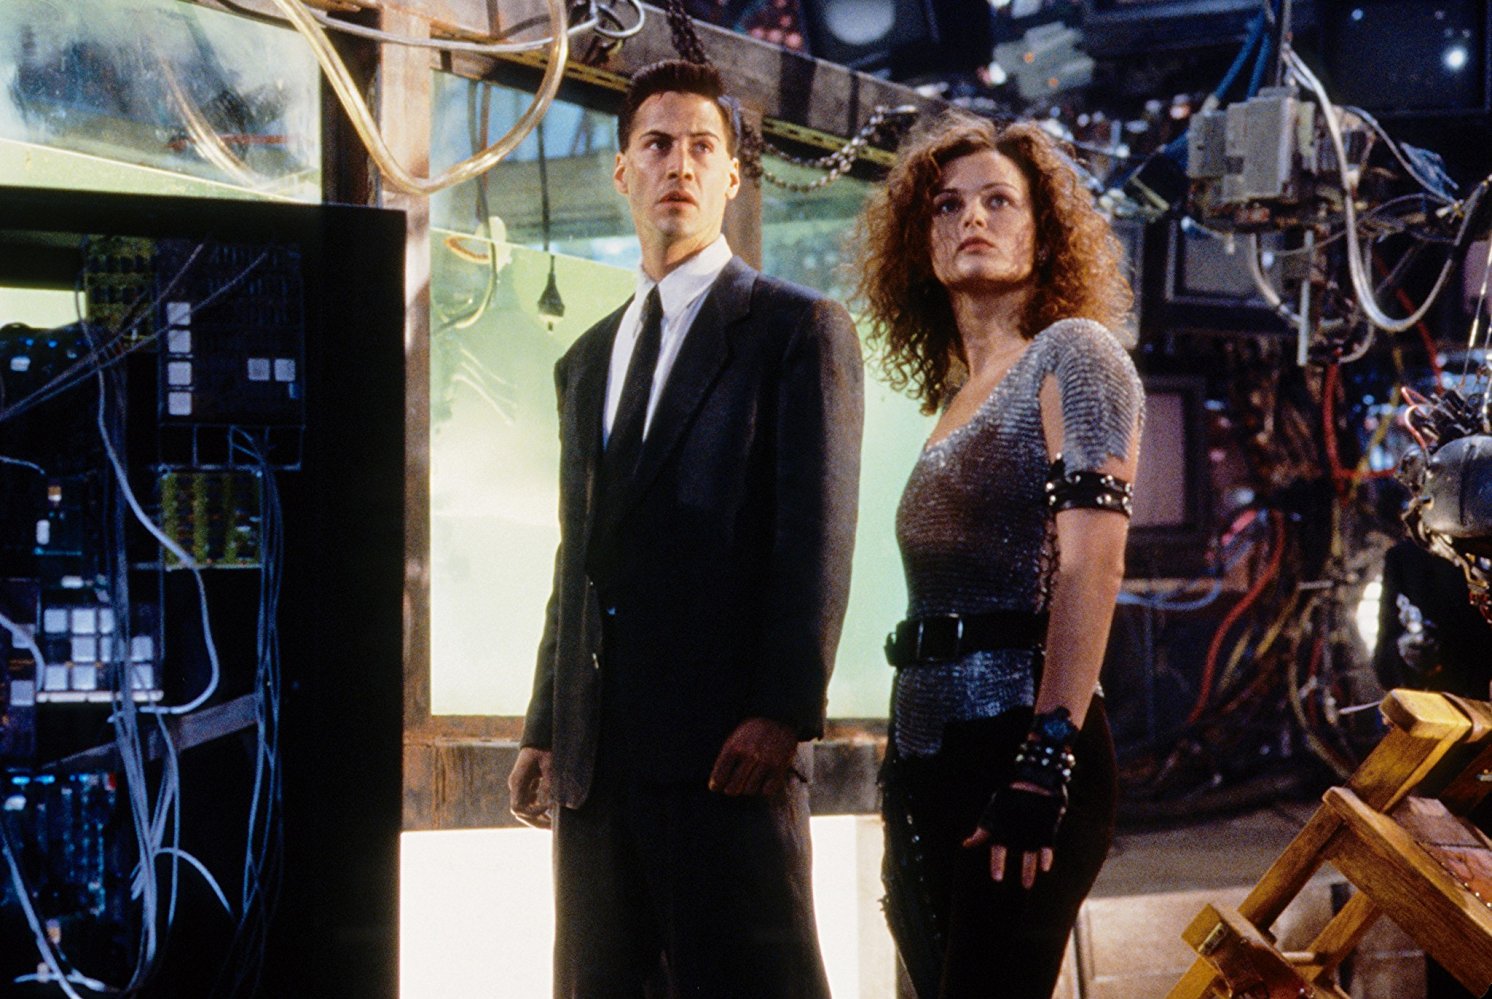 Keanu Reeves and Dina Meyer in a Cyberpunk future in Johnny Mnemonic (1995)